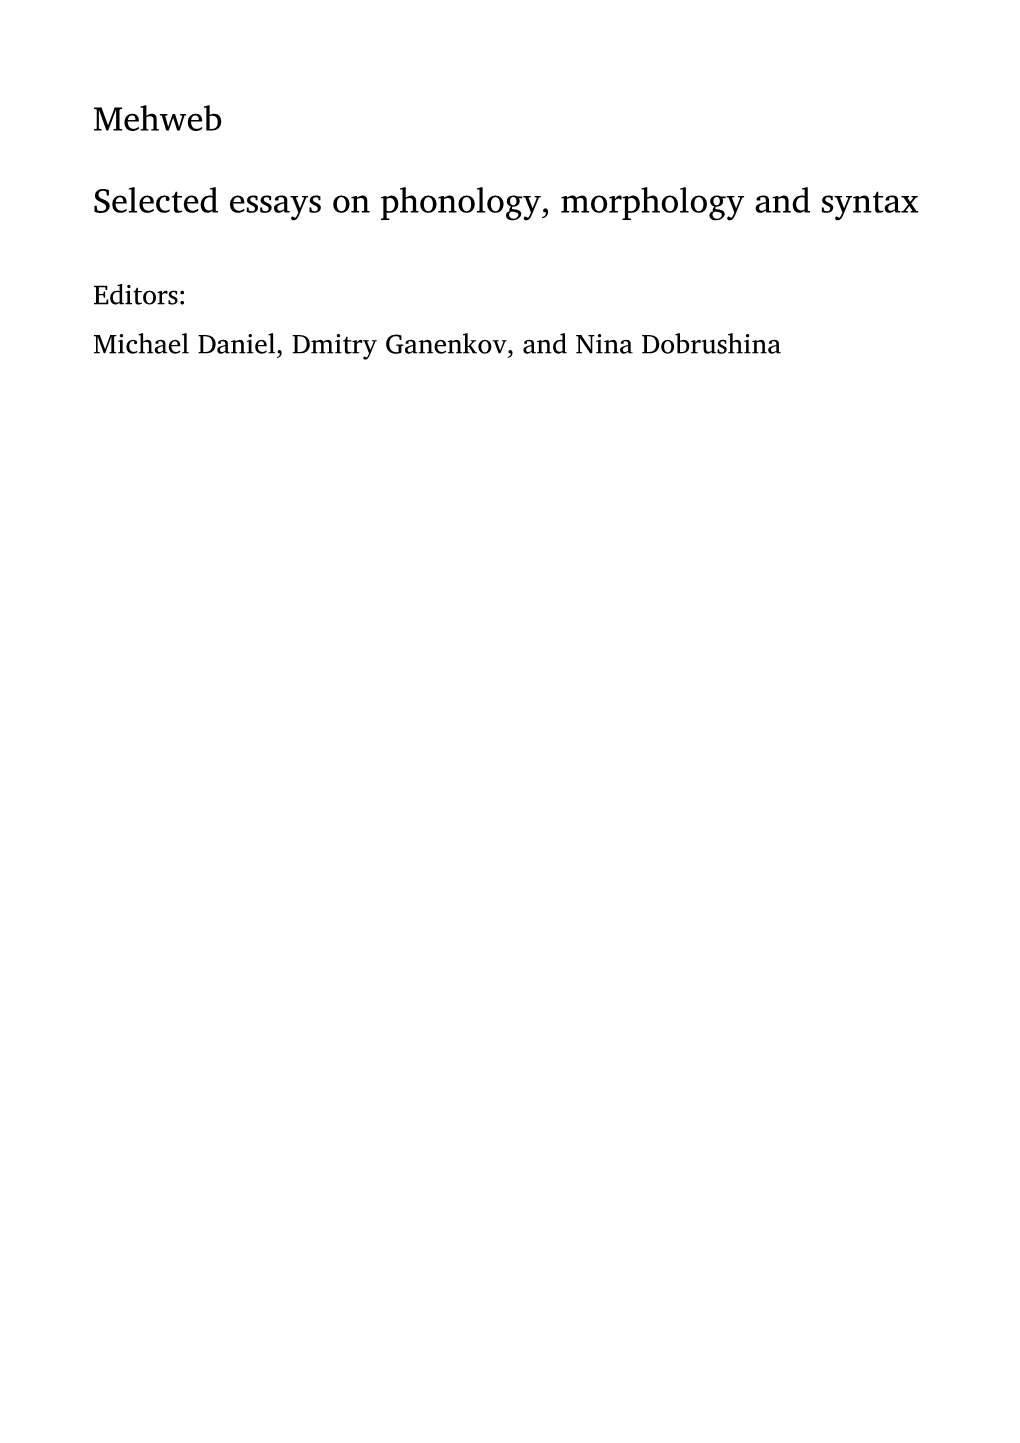 Mehweb Selected Essays on Phonology, Morphology and Syntax